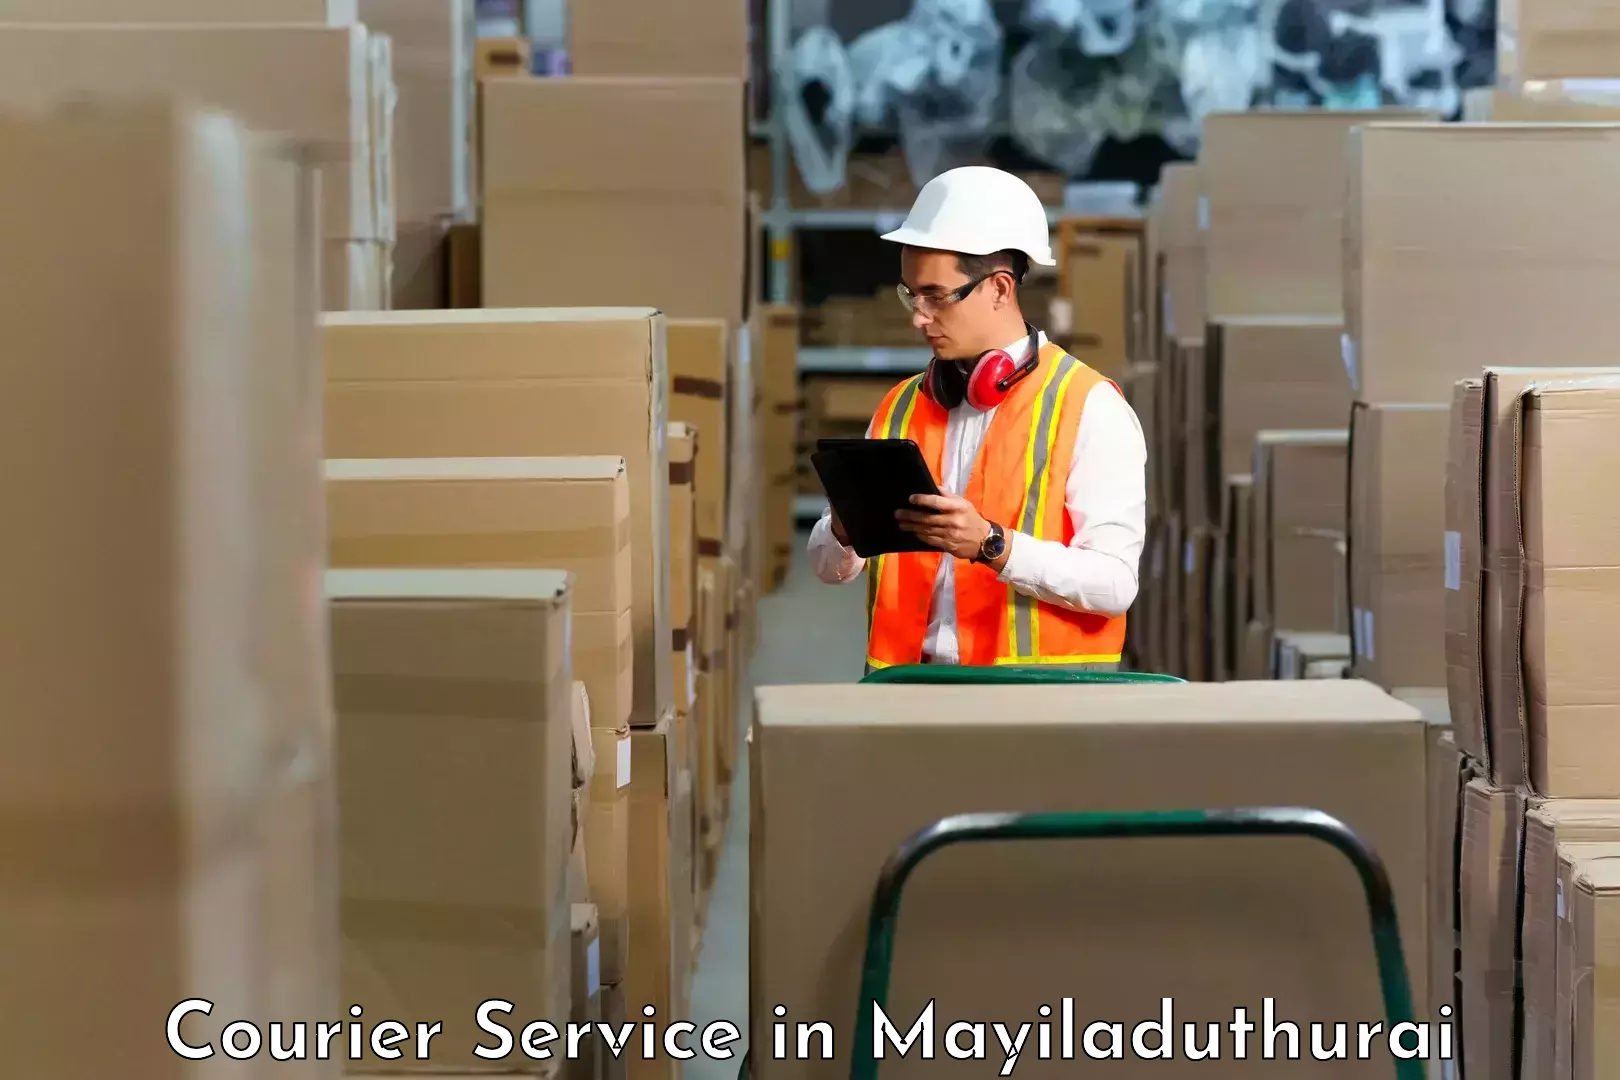 Customer-oriented courier services in Mayiladuthurai